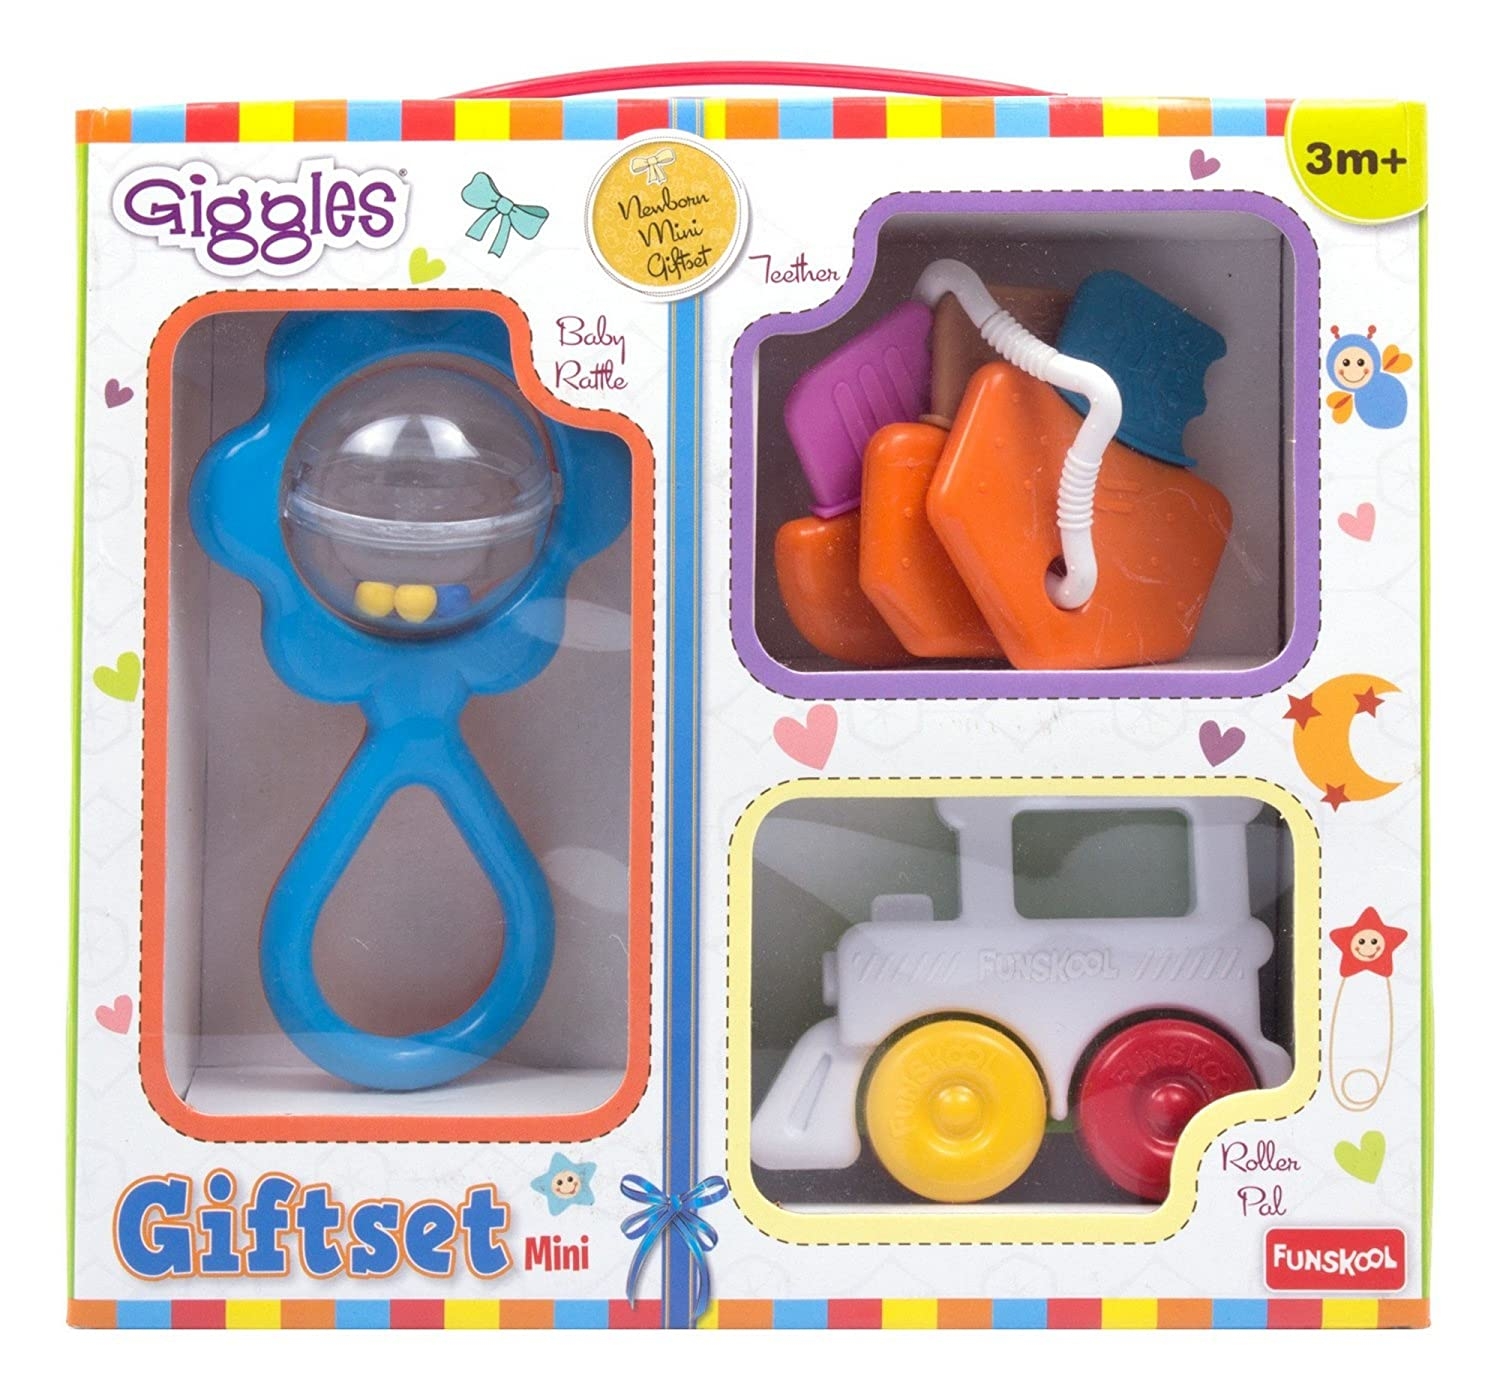 Funskool | Giggles Gift Set - New Born Rattle, Teether, Vehicle undefined